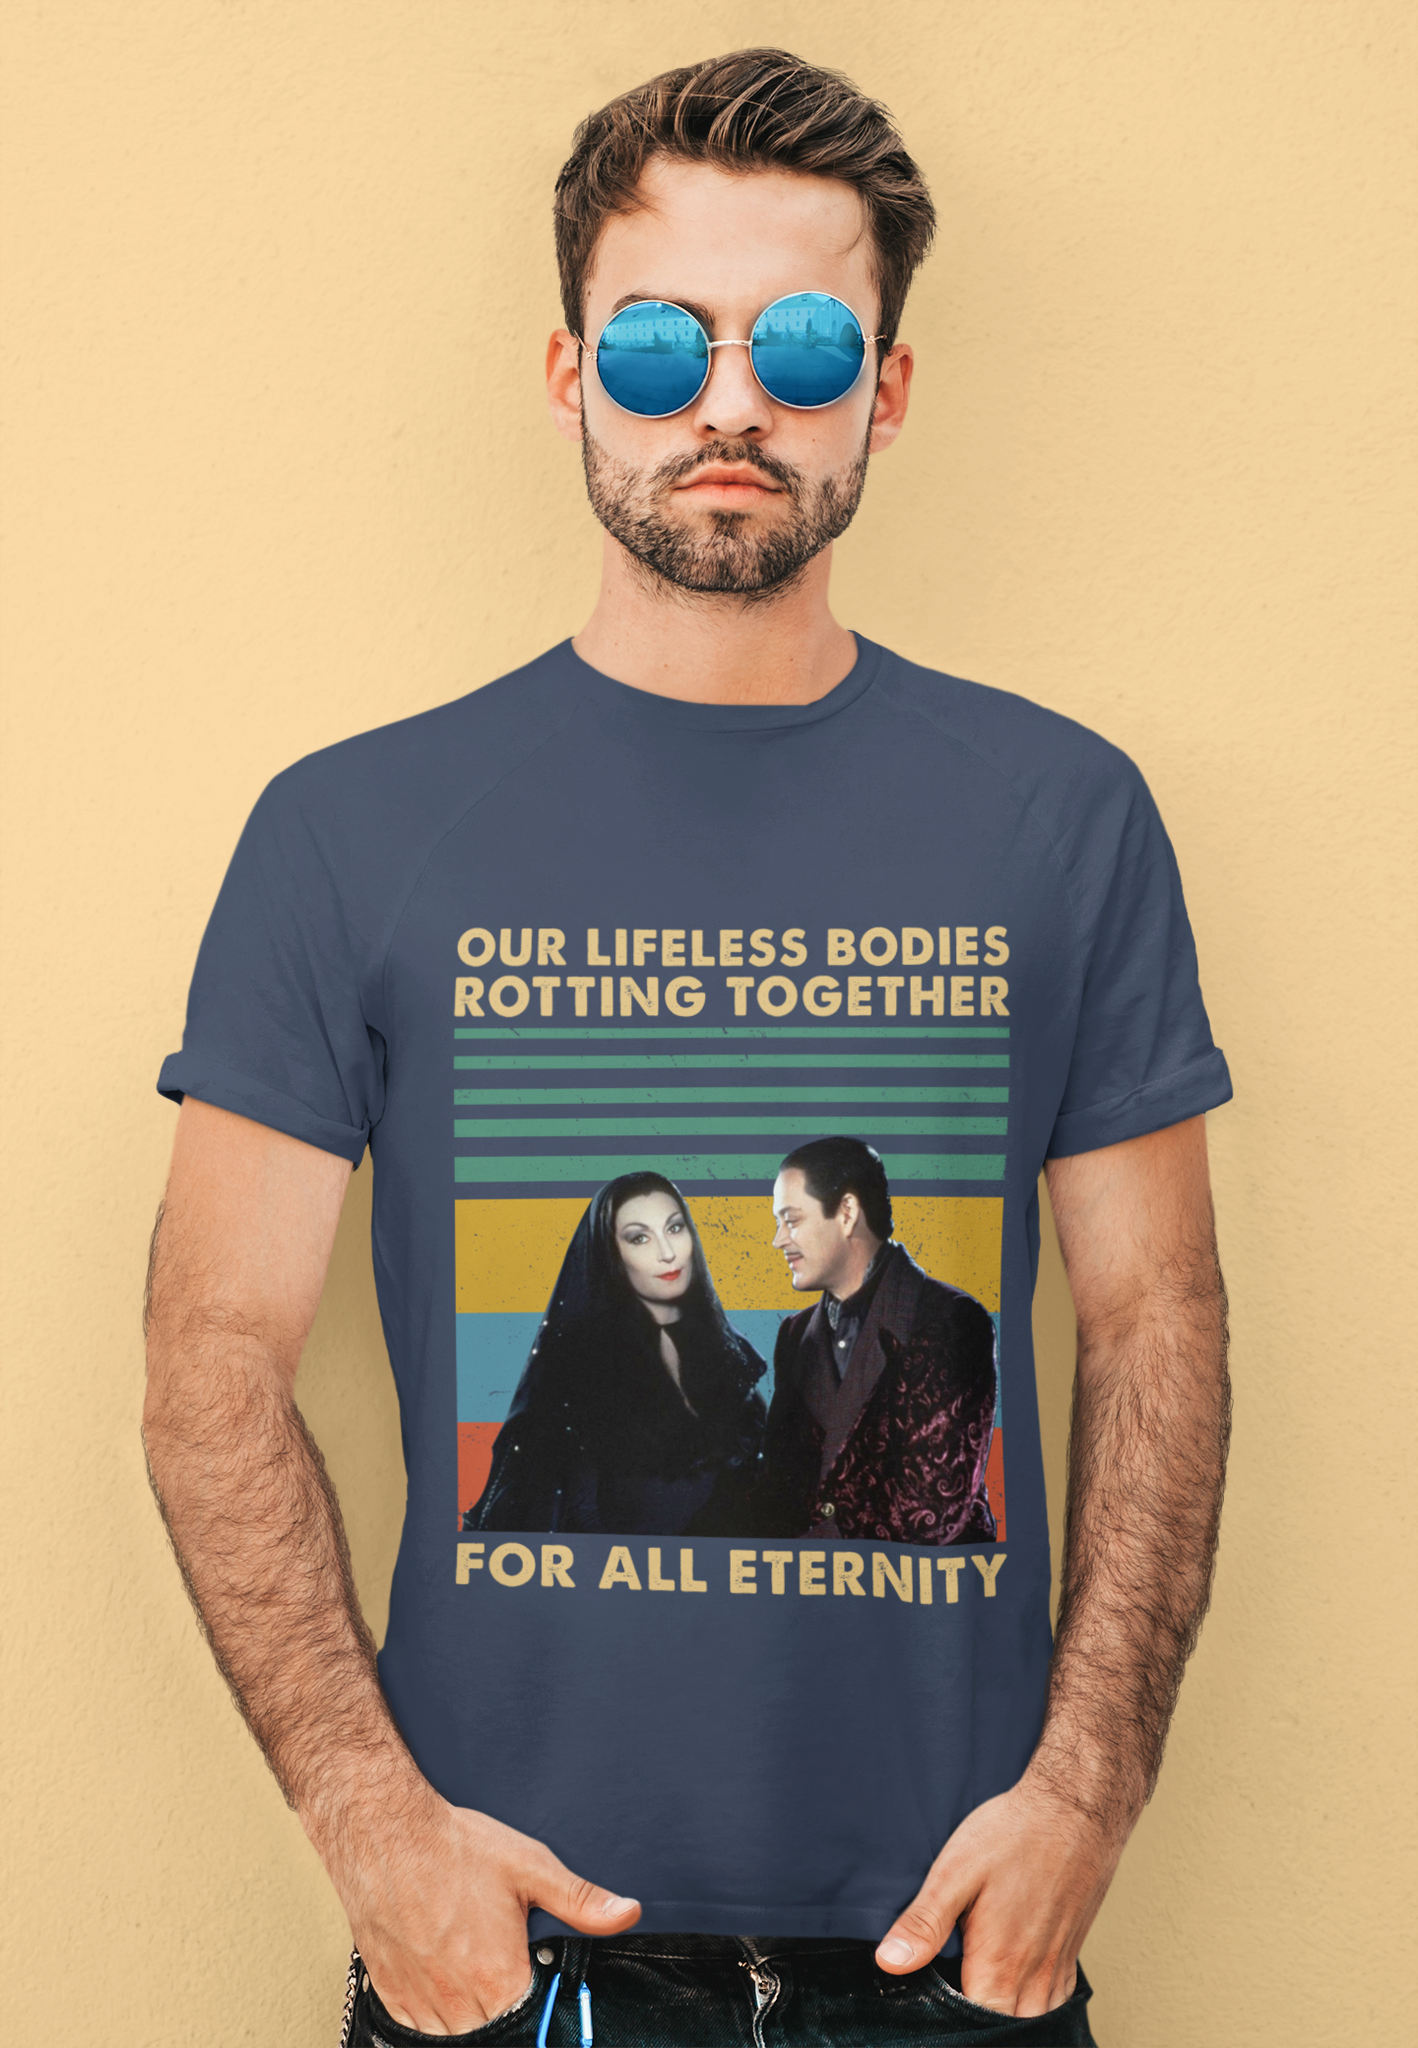 Addams Family Vintage T Shirt, Morticia Gomez Addams T shirt, Our Lifeless Bodies Rotting Together For All Eternity Shirt, Halloween Gifts